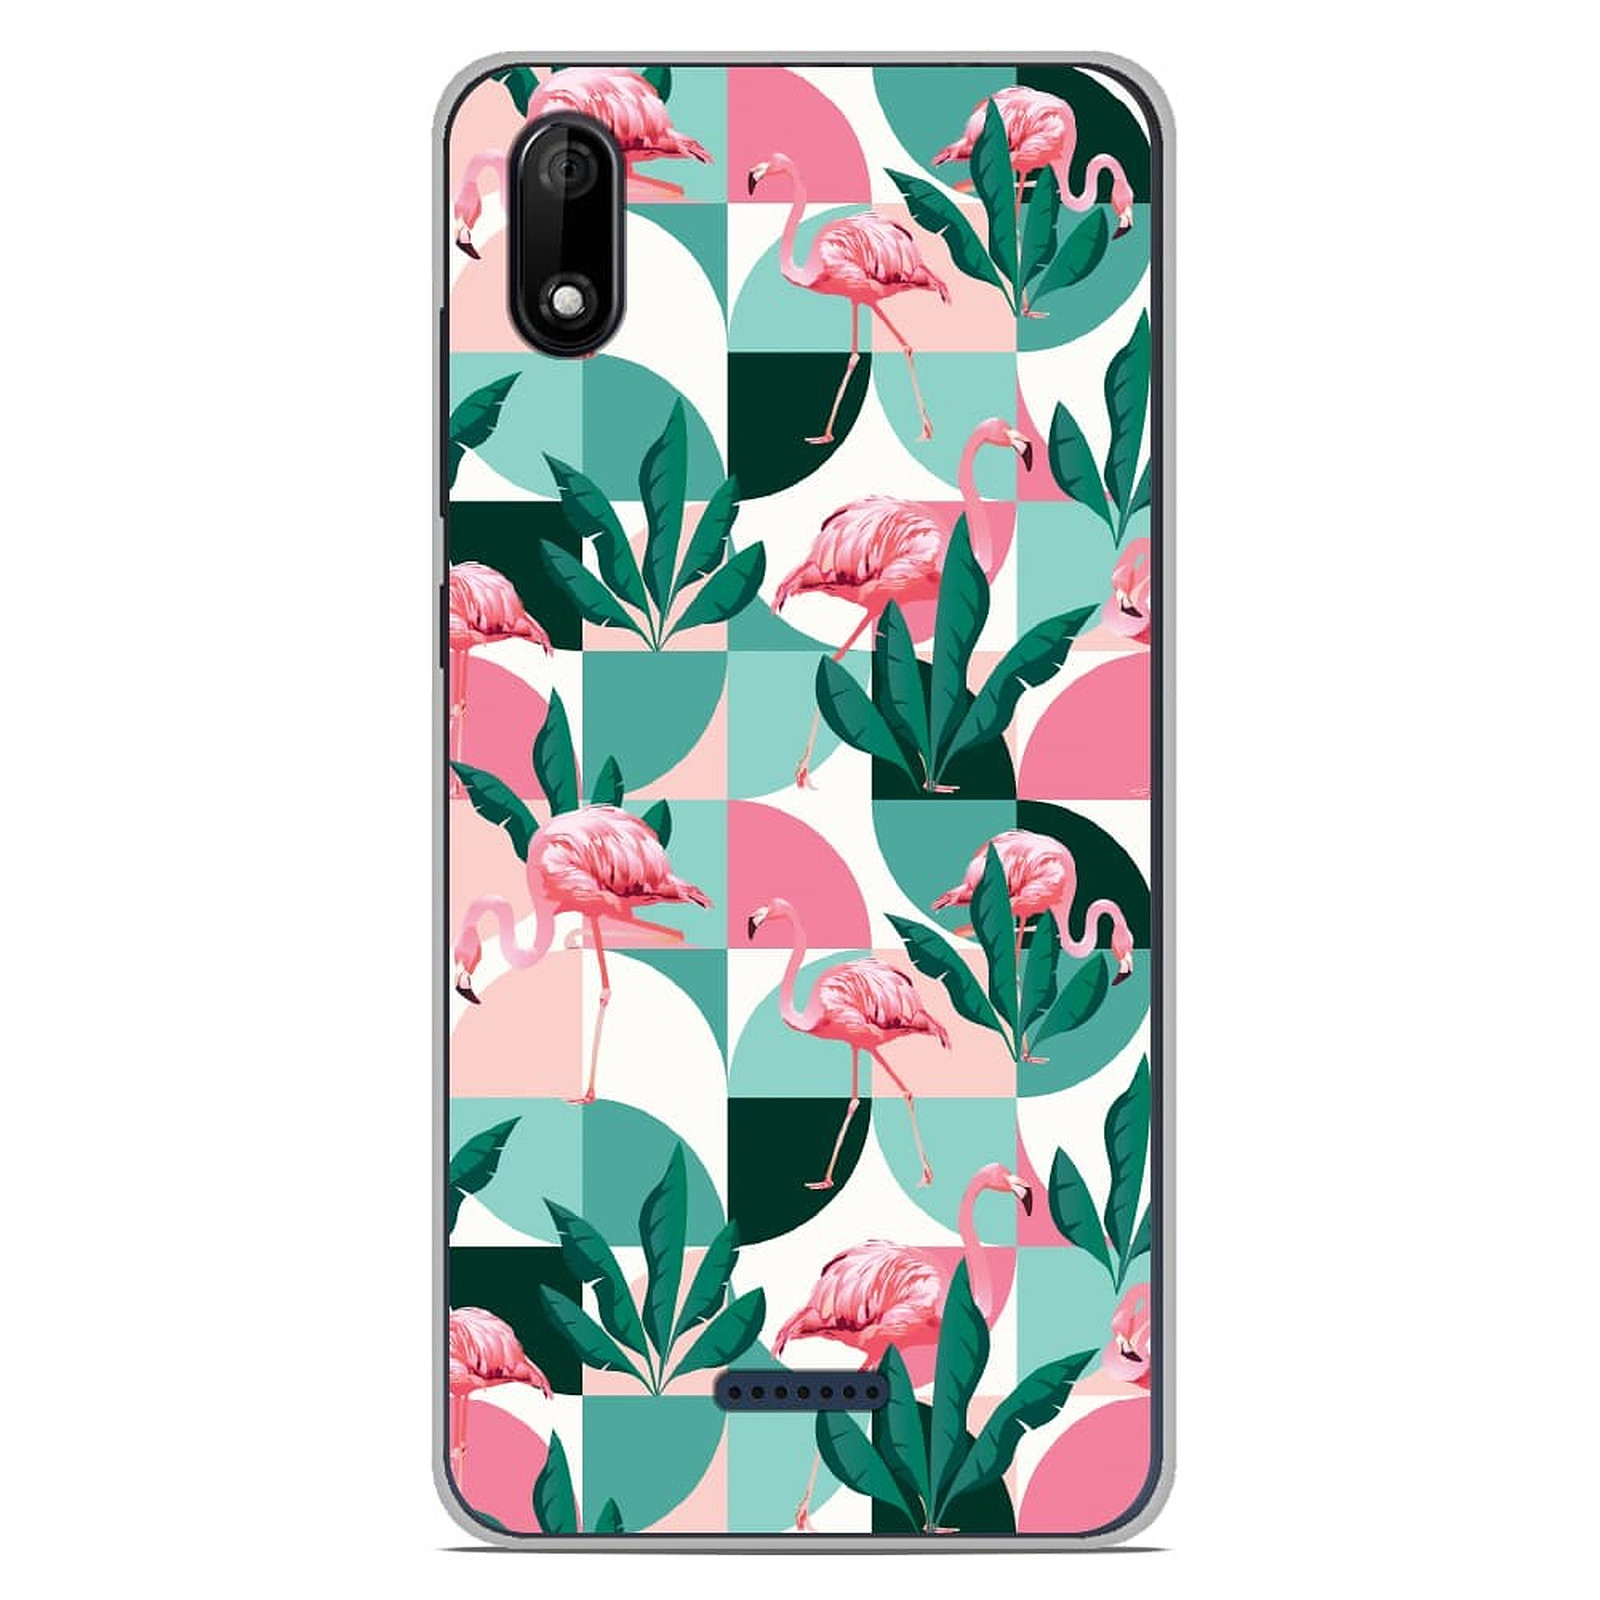 1001 Coques Coque silicone gel Wiko Y50 motif Flamants Roses ge´ome´trique - Coque telephone 1001Coques